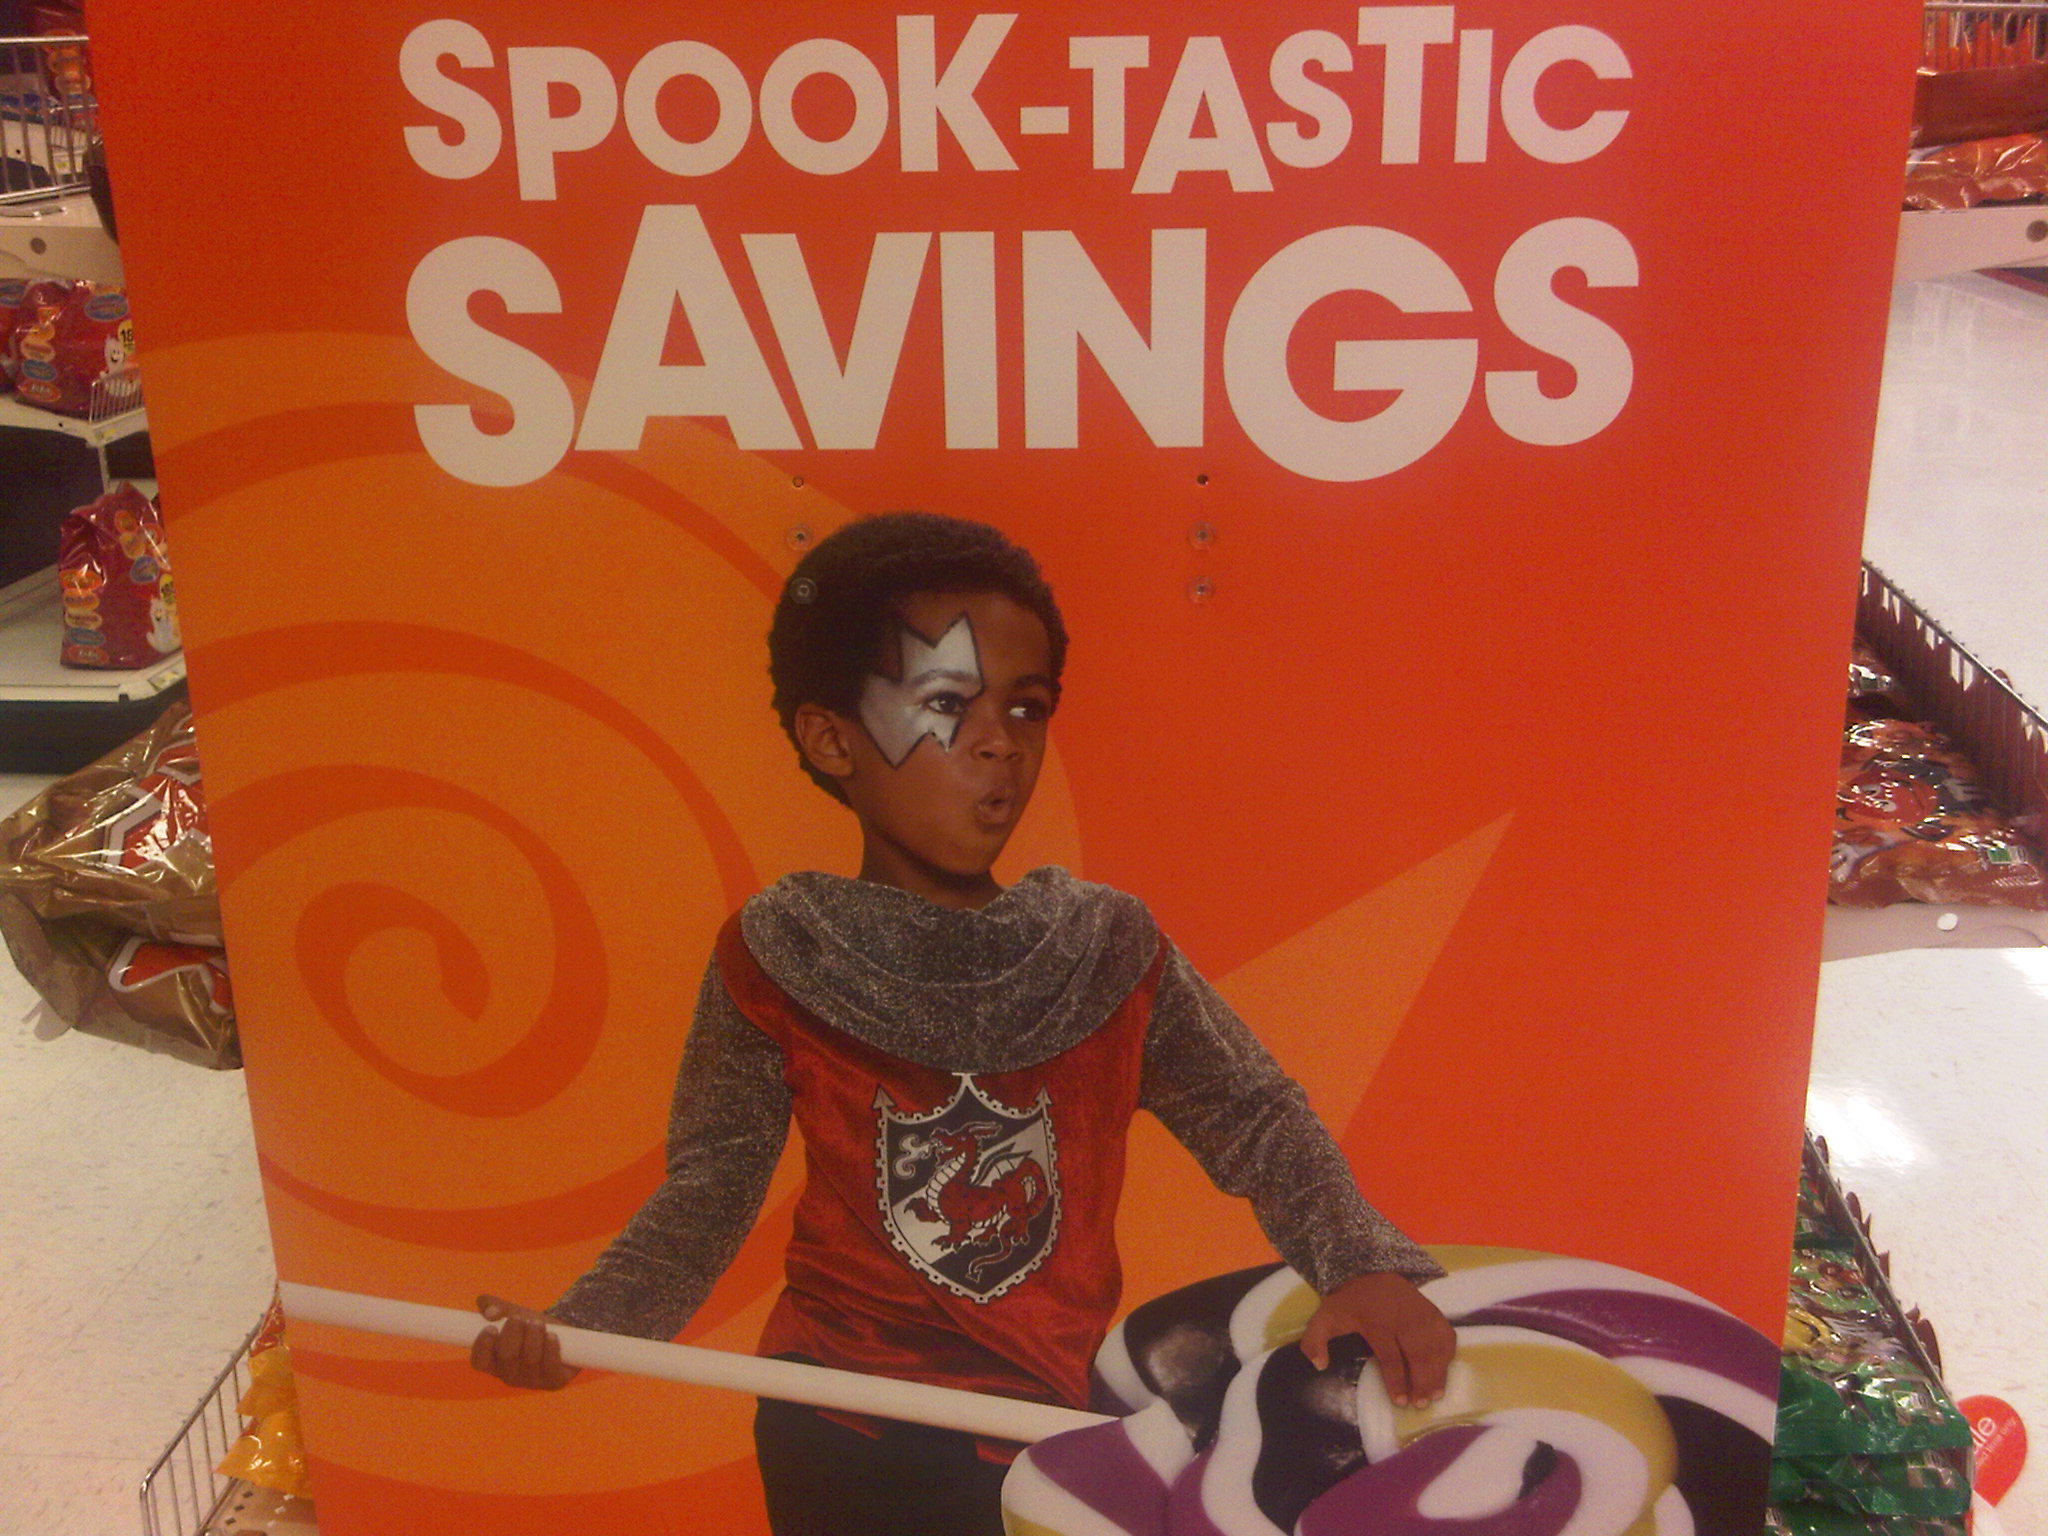 Snapped this pic in Target.  It is part of their Halloween marketing campaign but they should have paid a little more attention.  Maybe this is a sign that racism is finally being forgotten that it was not caught.